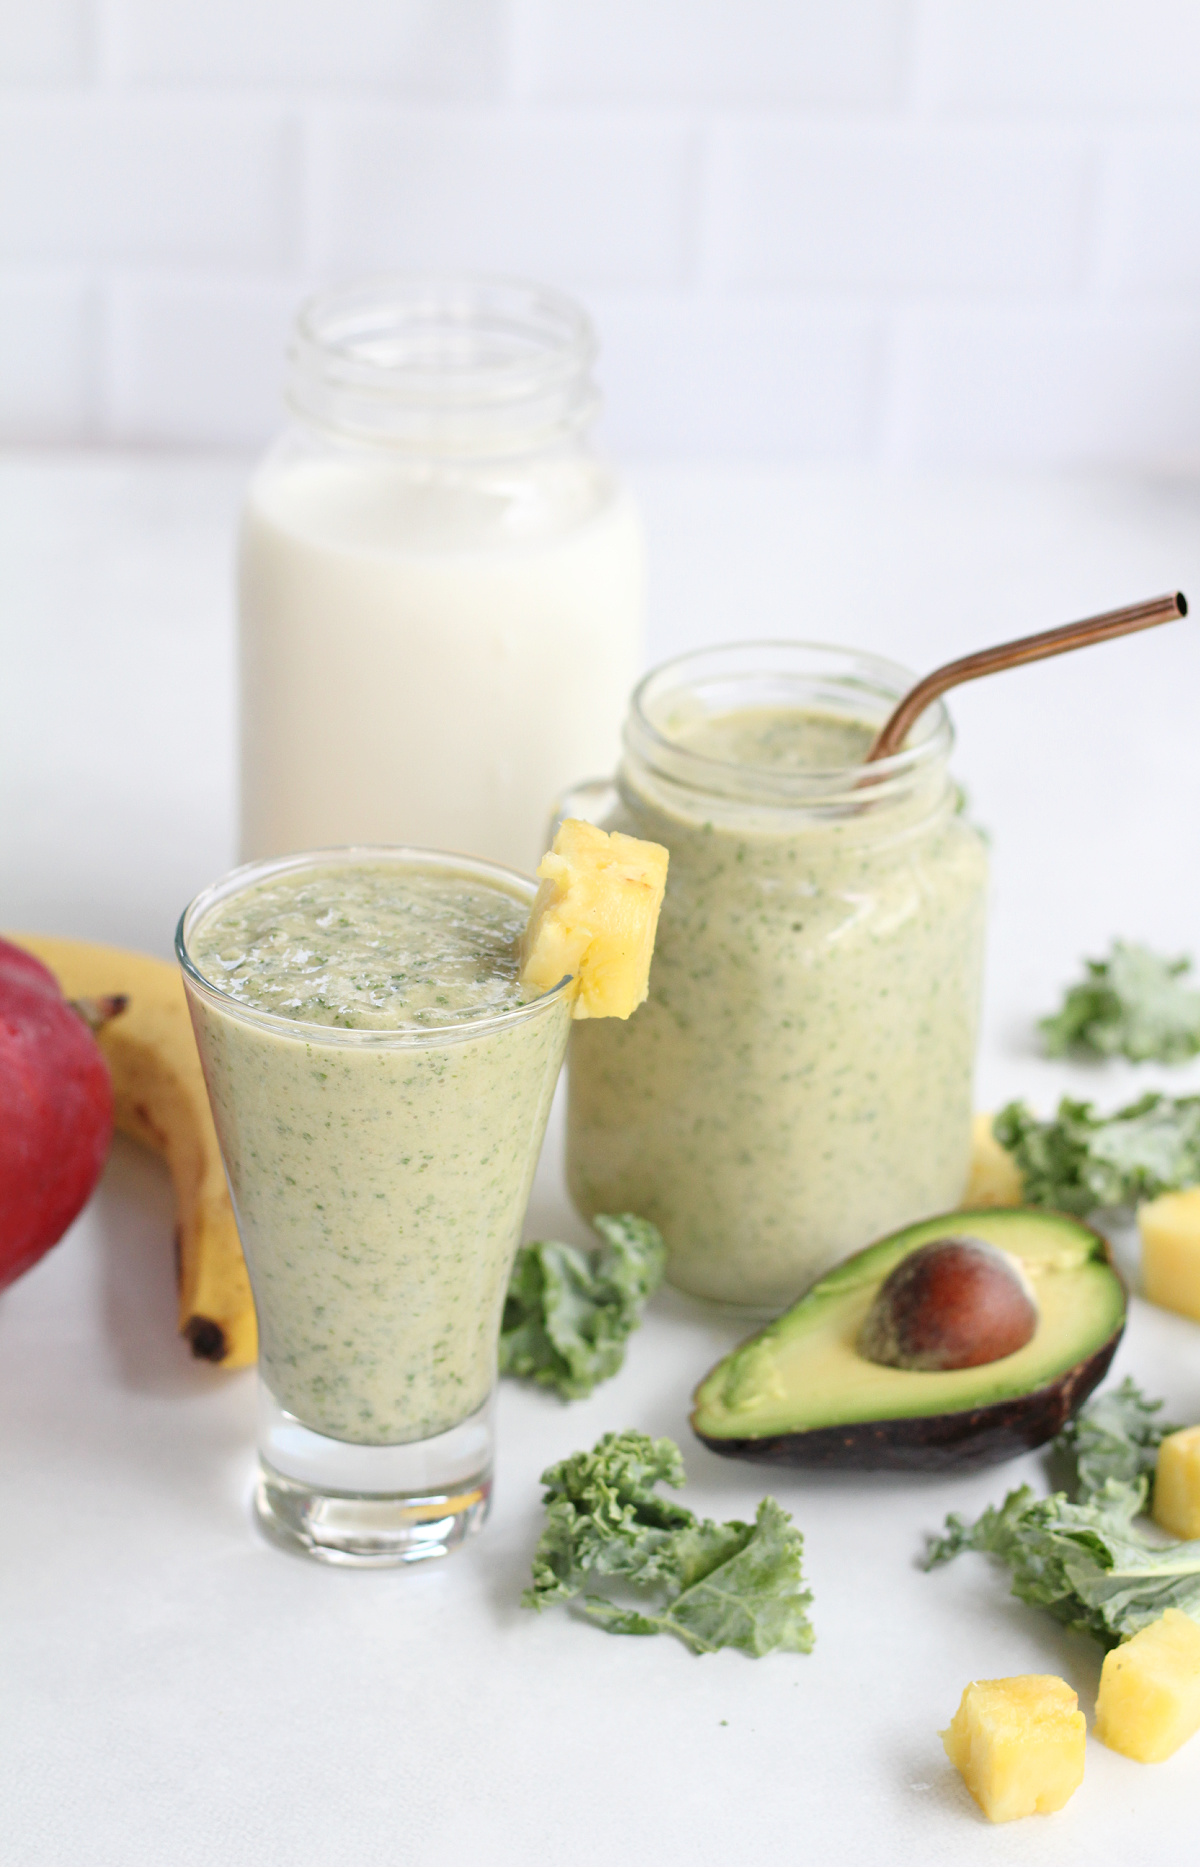 Tasty Beauty Smoothie